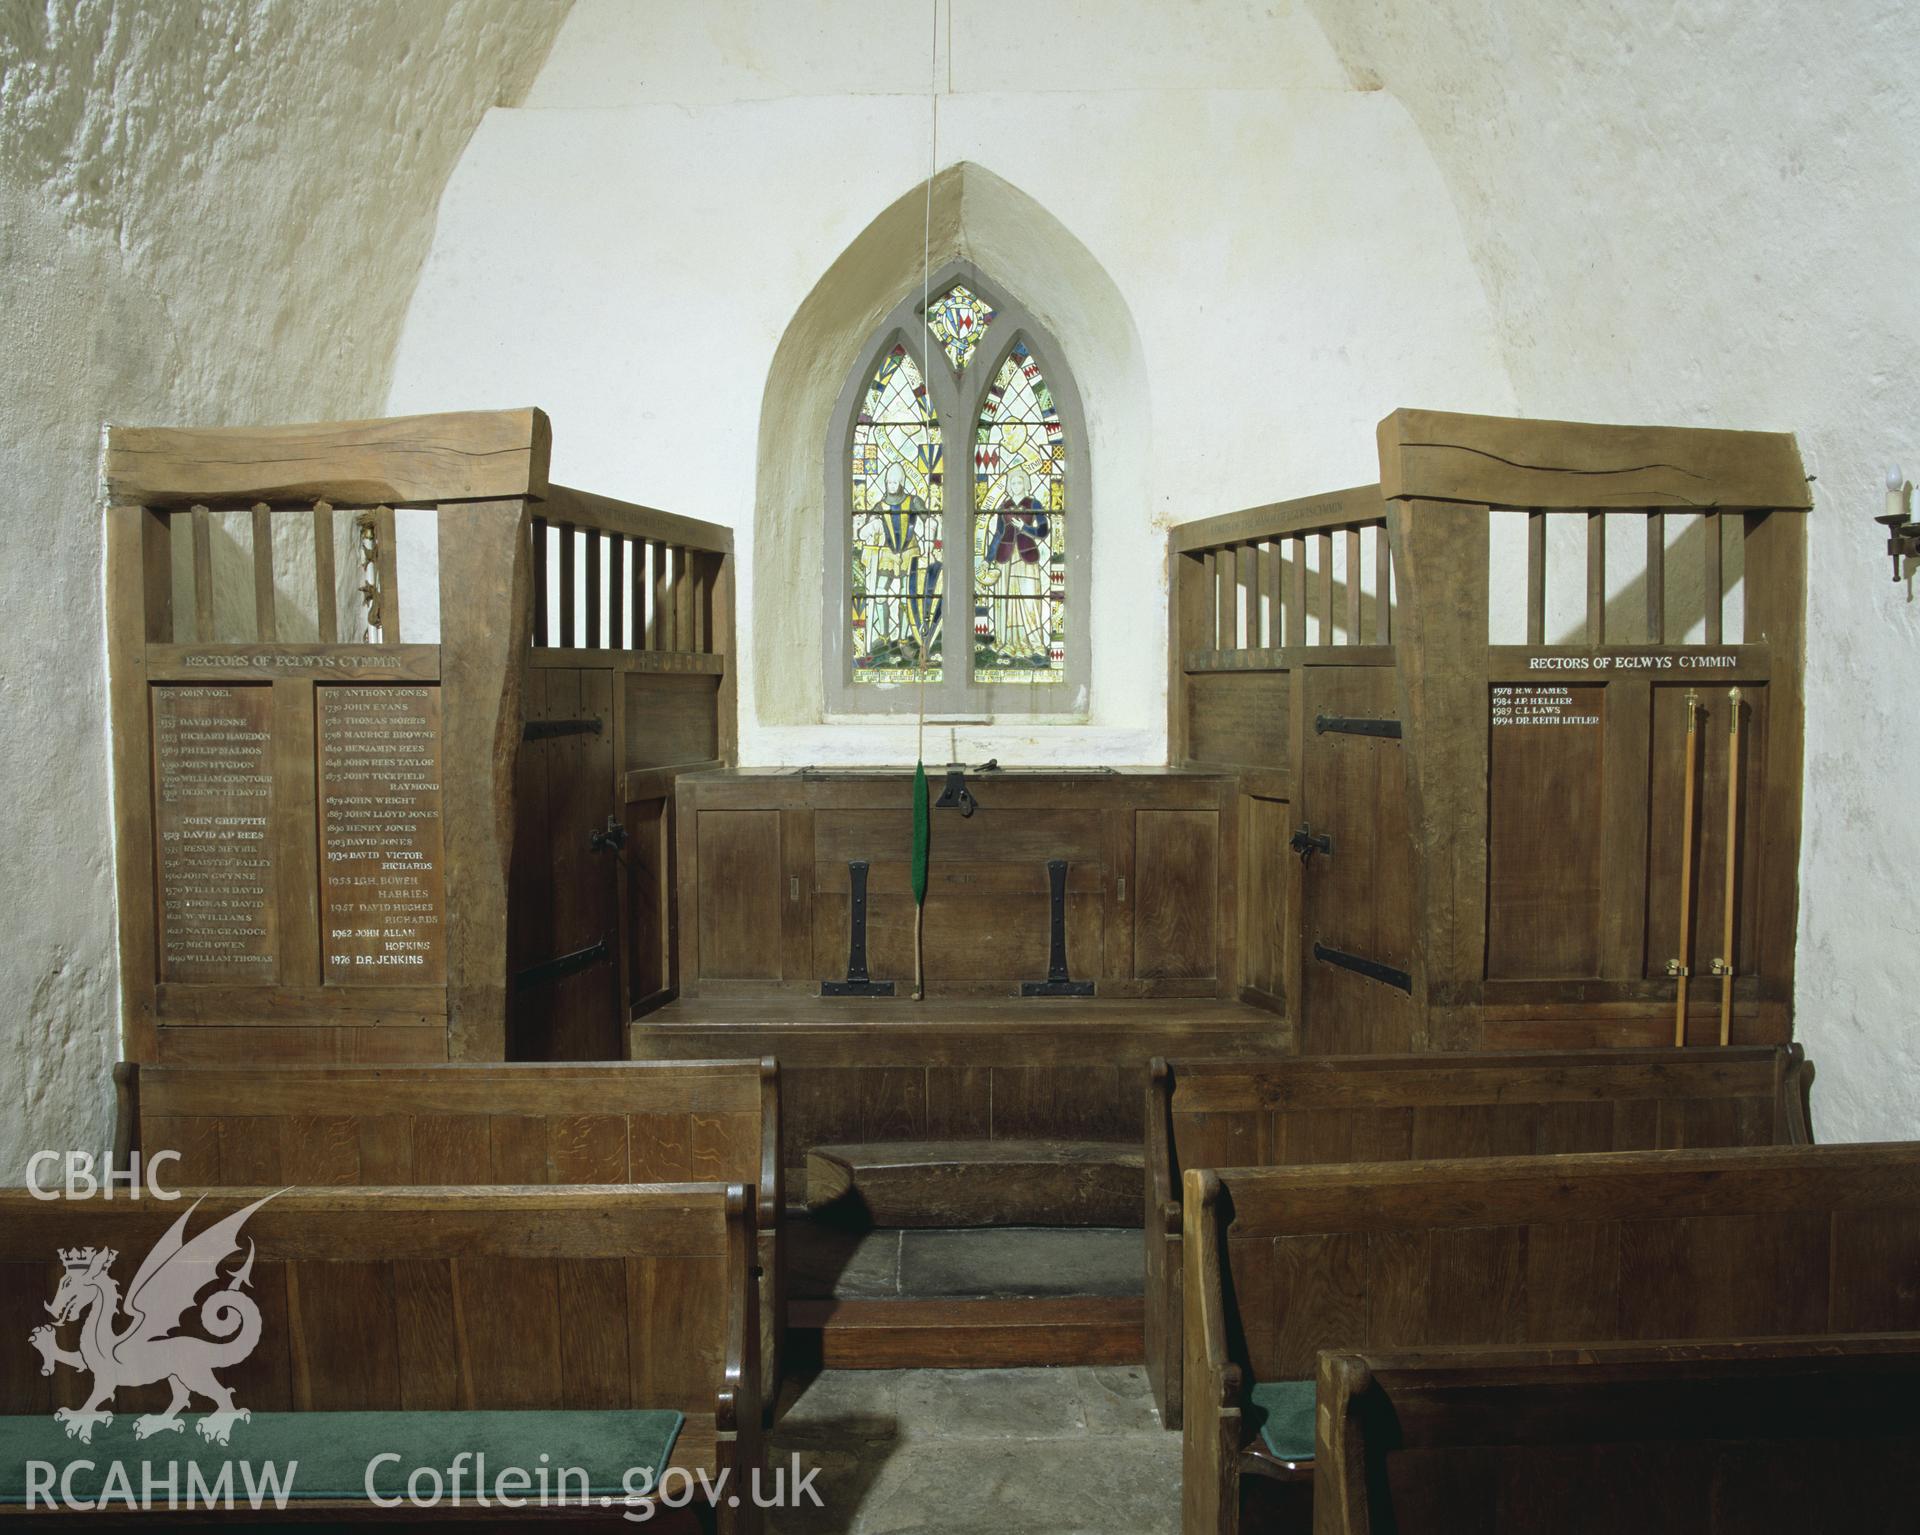 Colour transparency showing interior view of St Margaret's Church, Eglwyscumin, produced by Iain Wright, June 2004